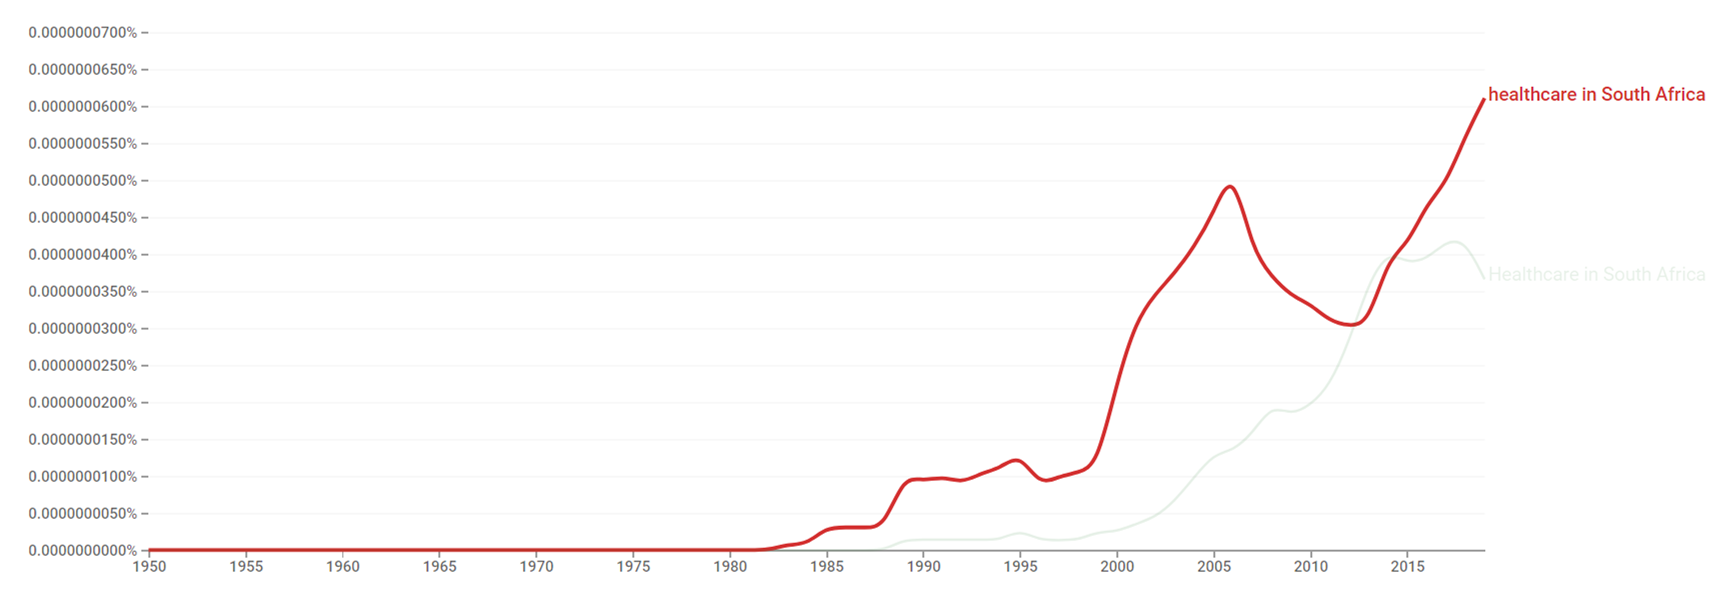 Healthcare in South Africa ngram.png